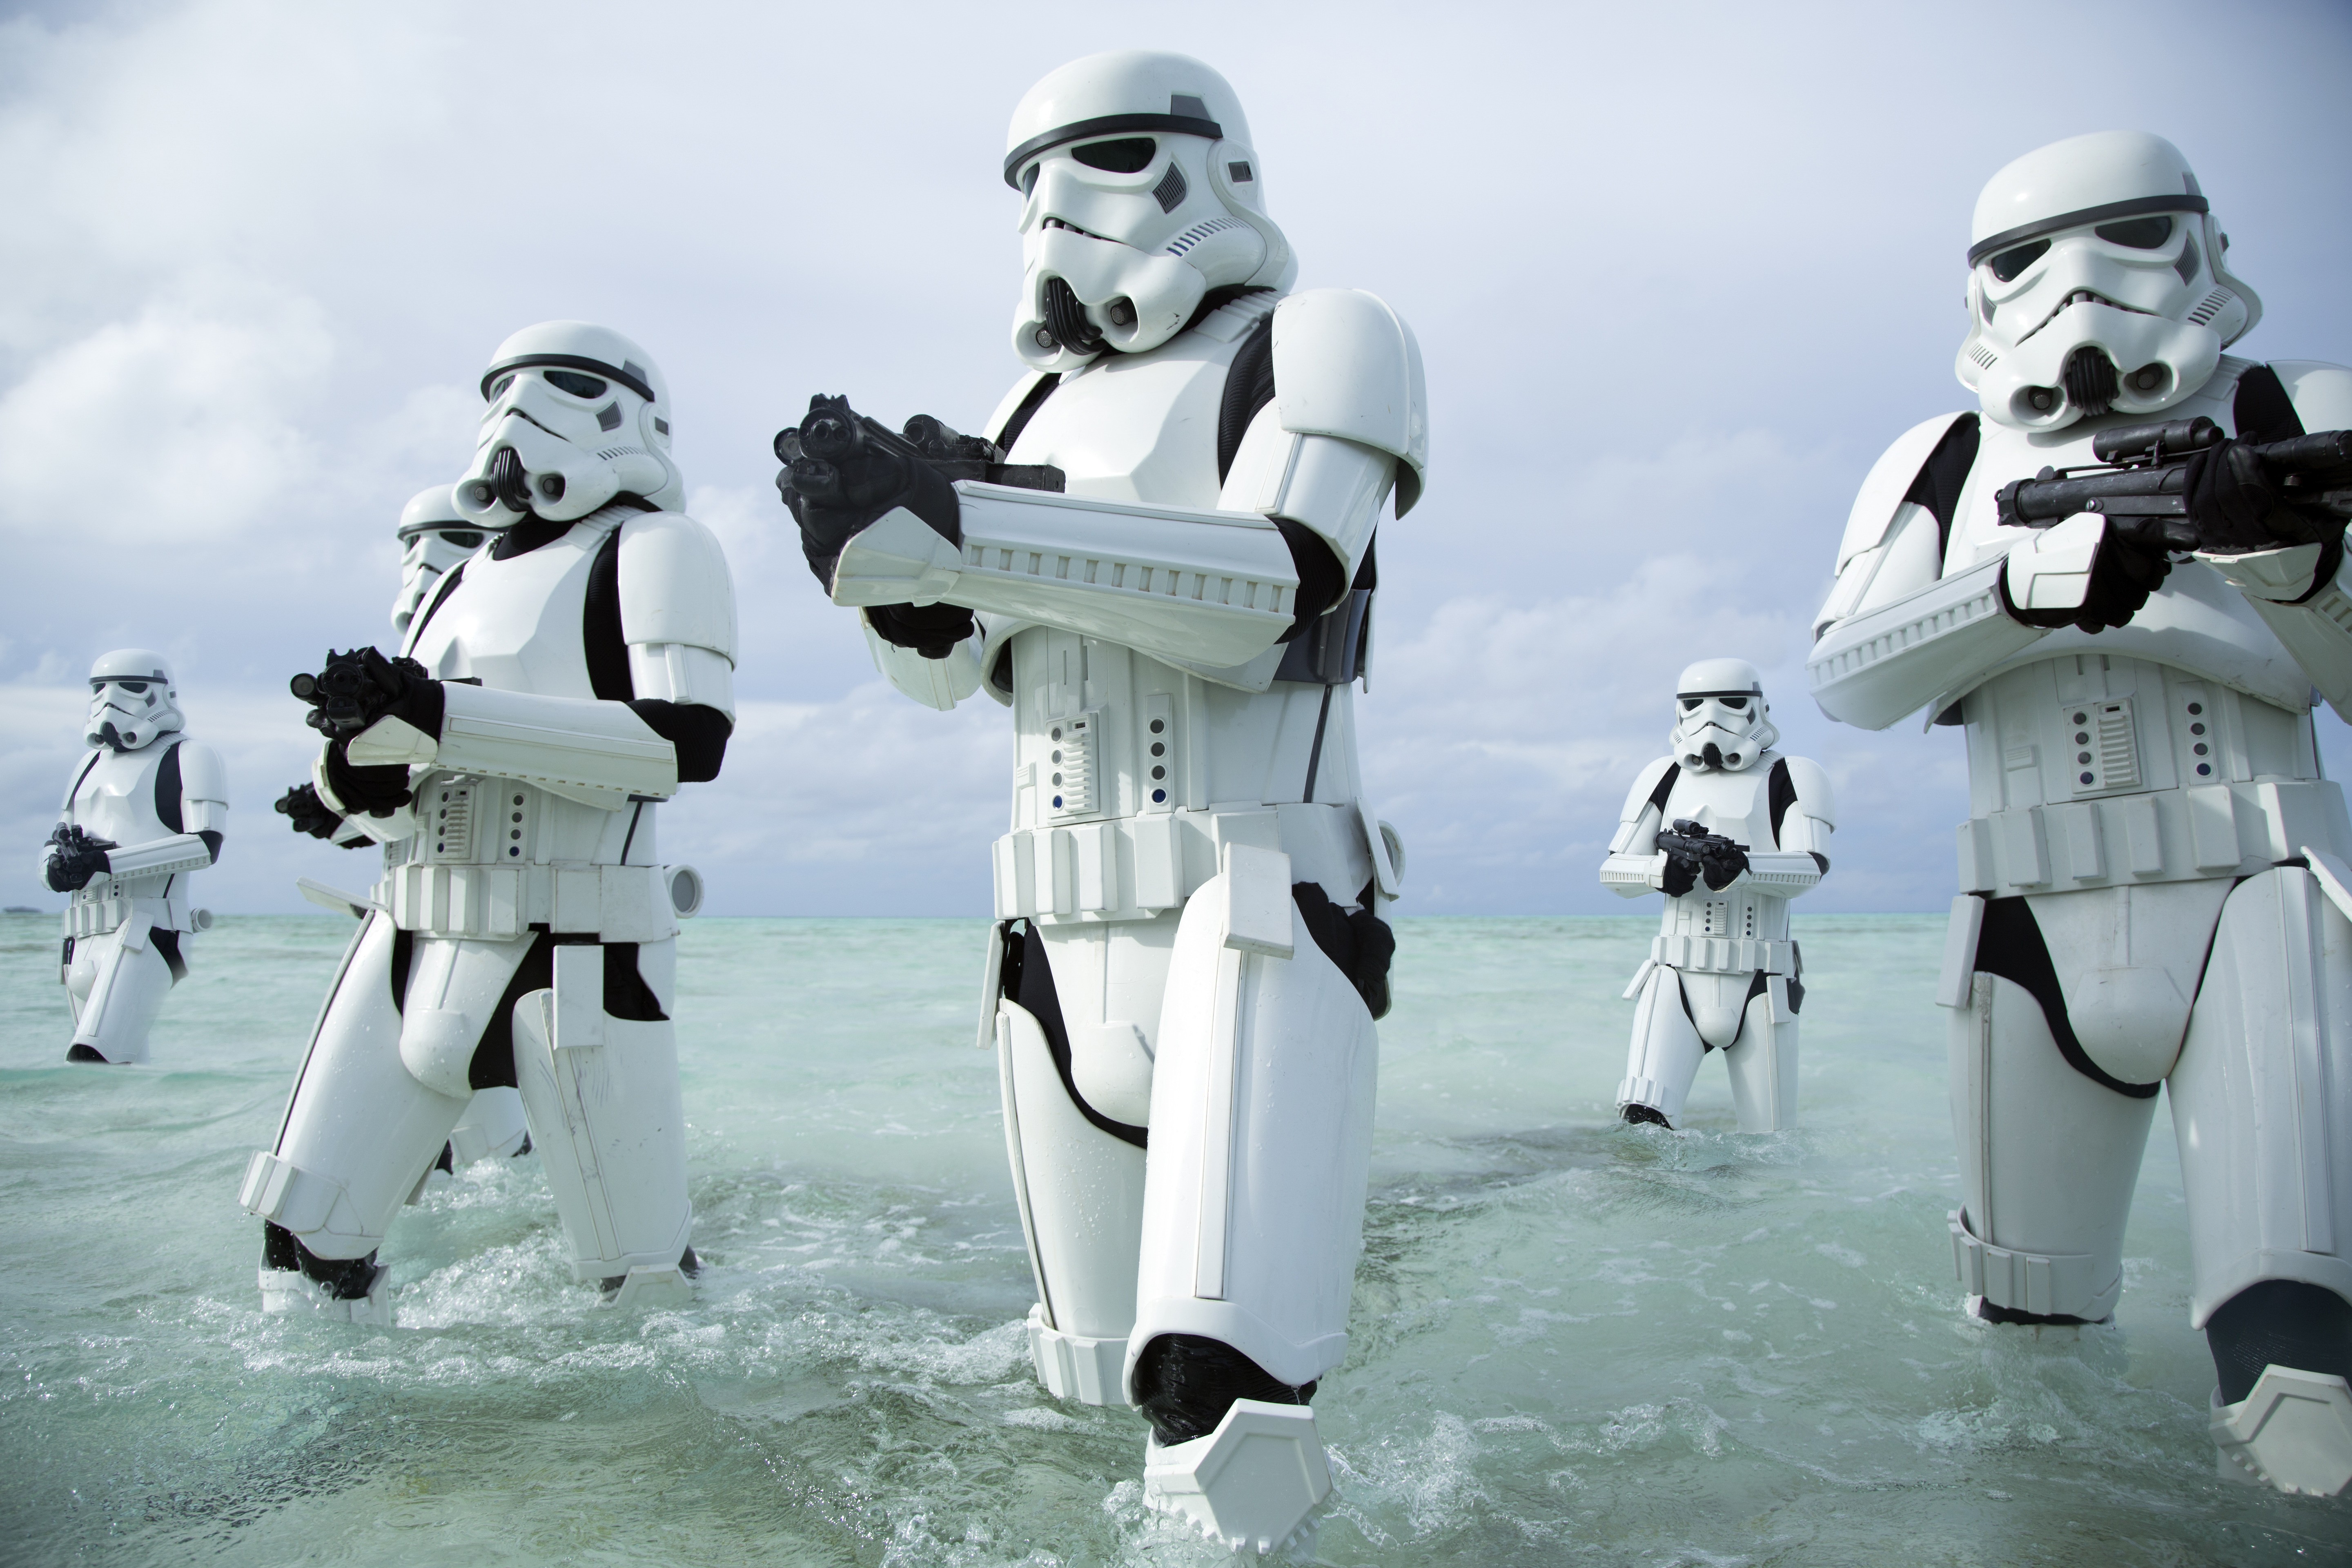 General 5760x3840 Star Wars Rogue One: A Star Wars Story stormtrooper Imperial Forces water blaster science fiction soldier movies